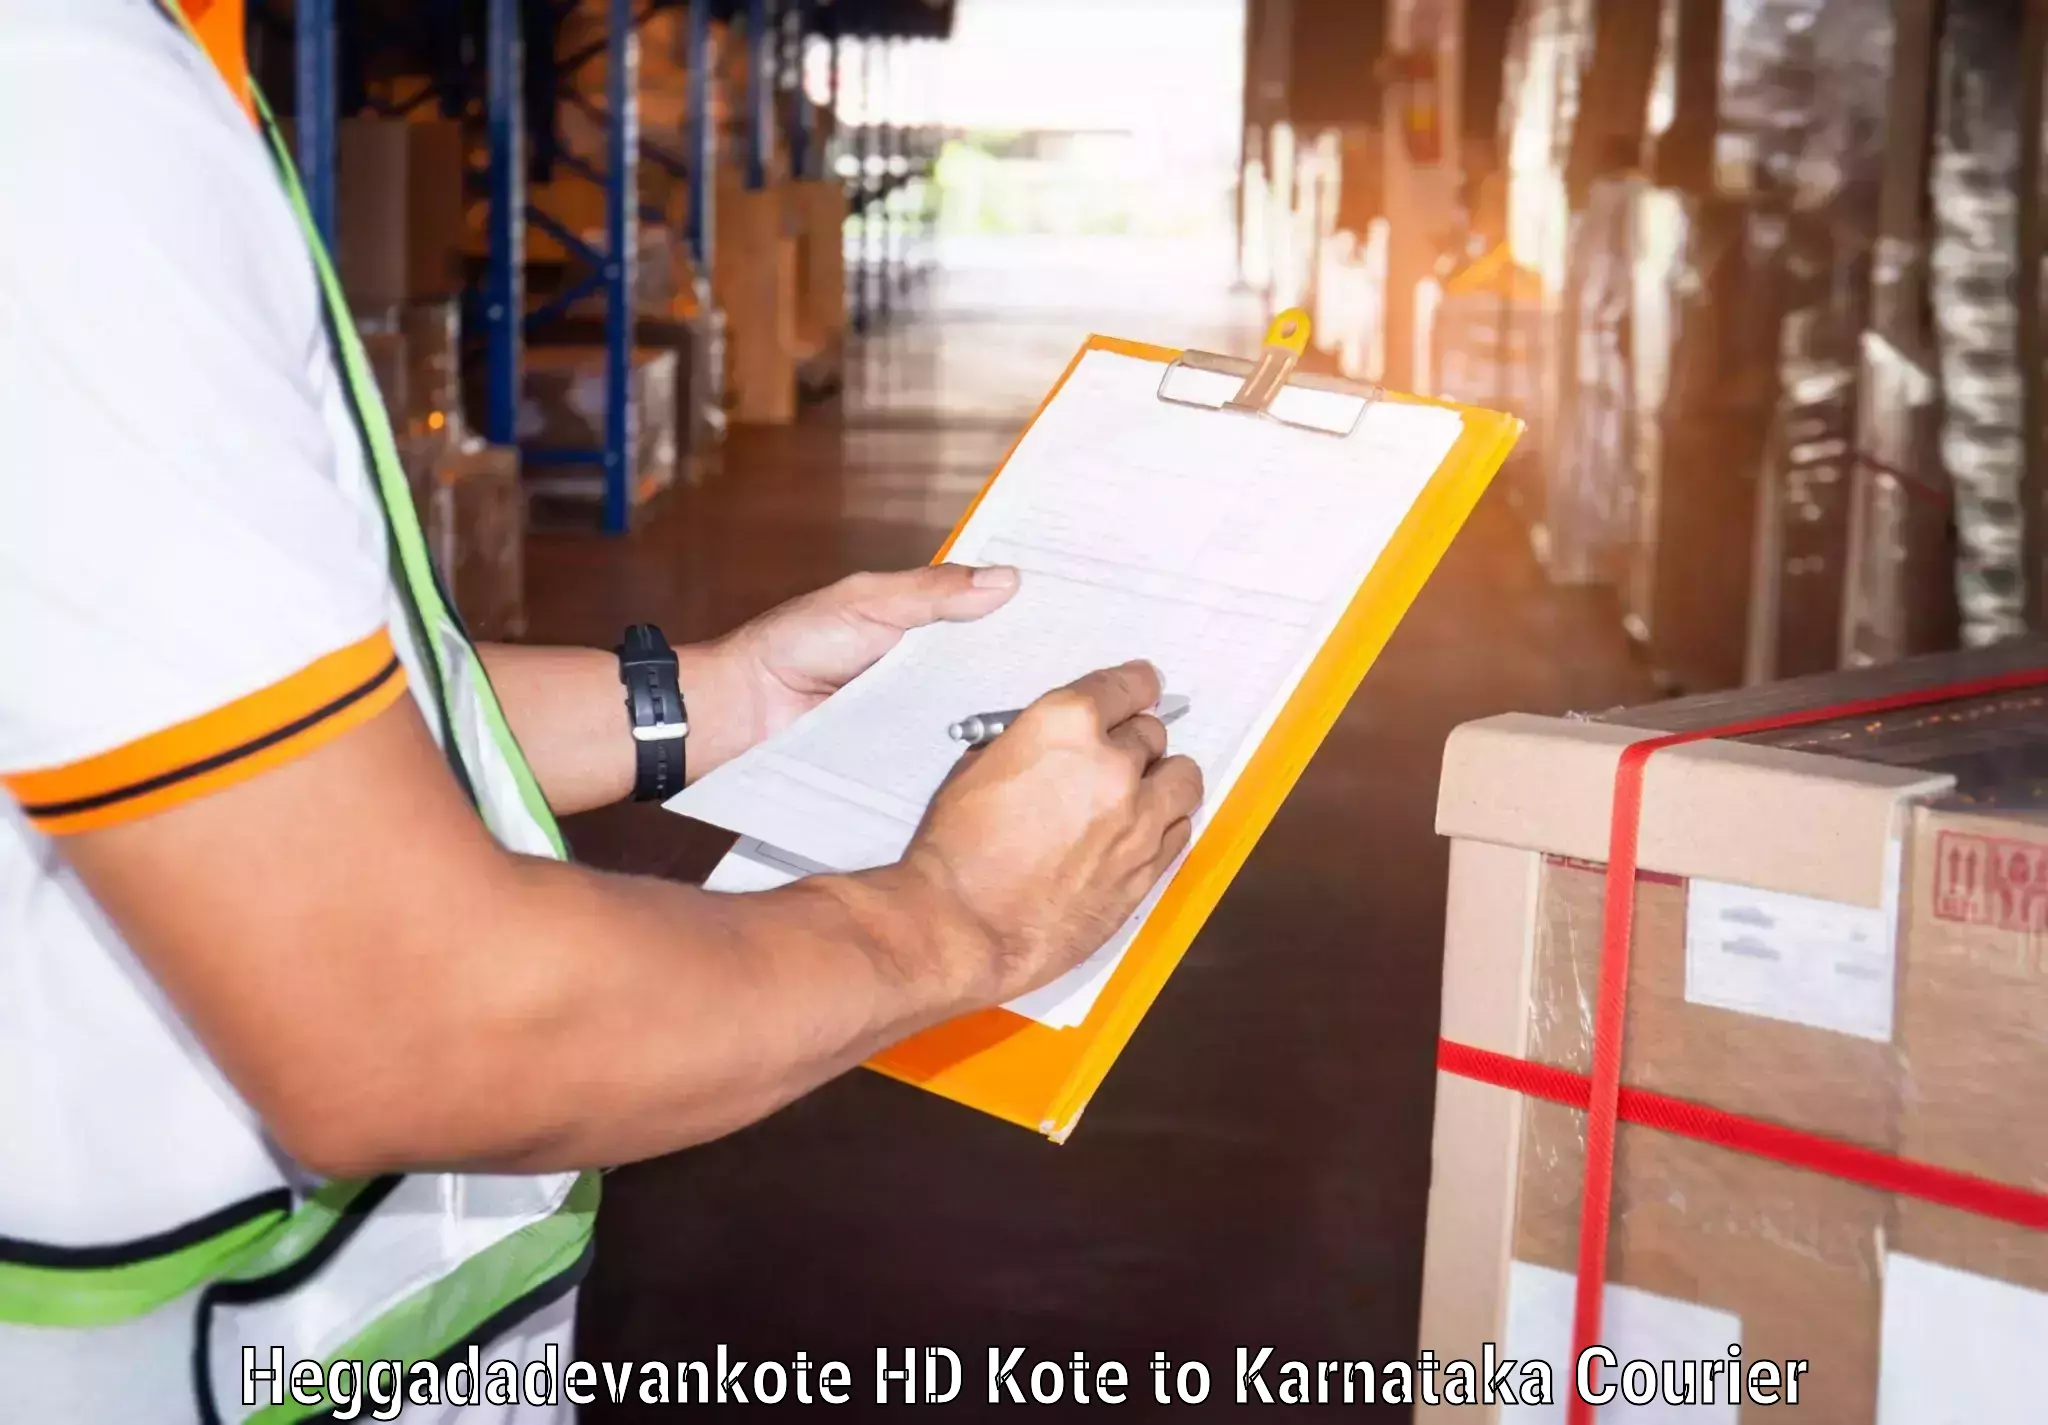 Efficient package consolidation Heggadadevankote HD Kote to Sirsi